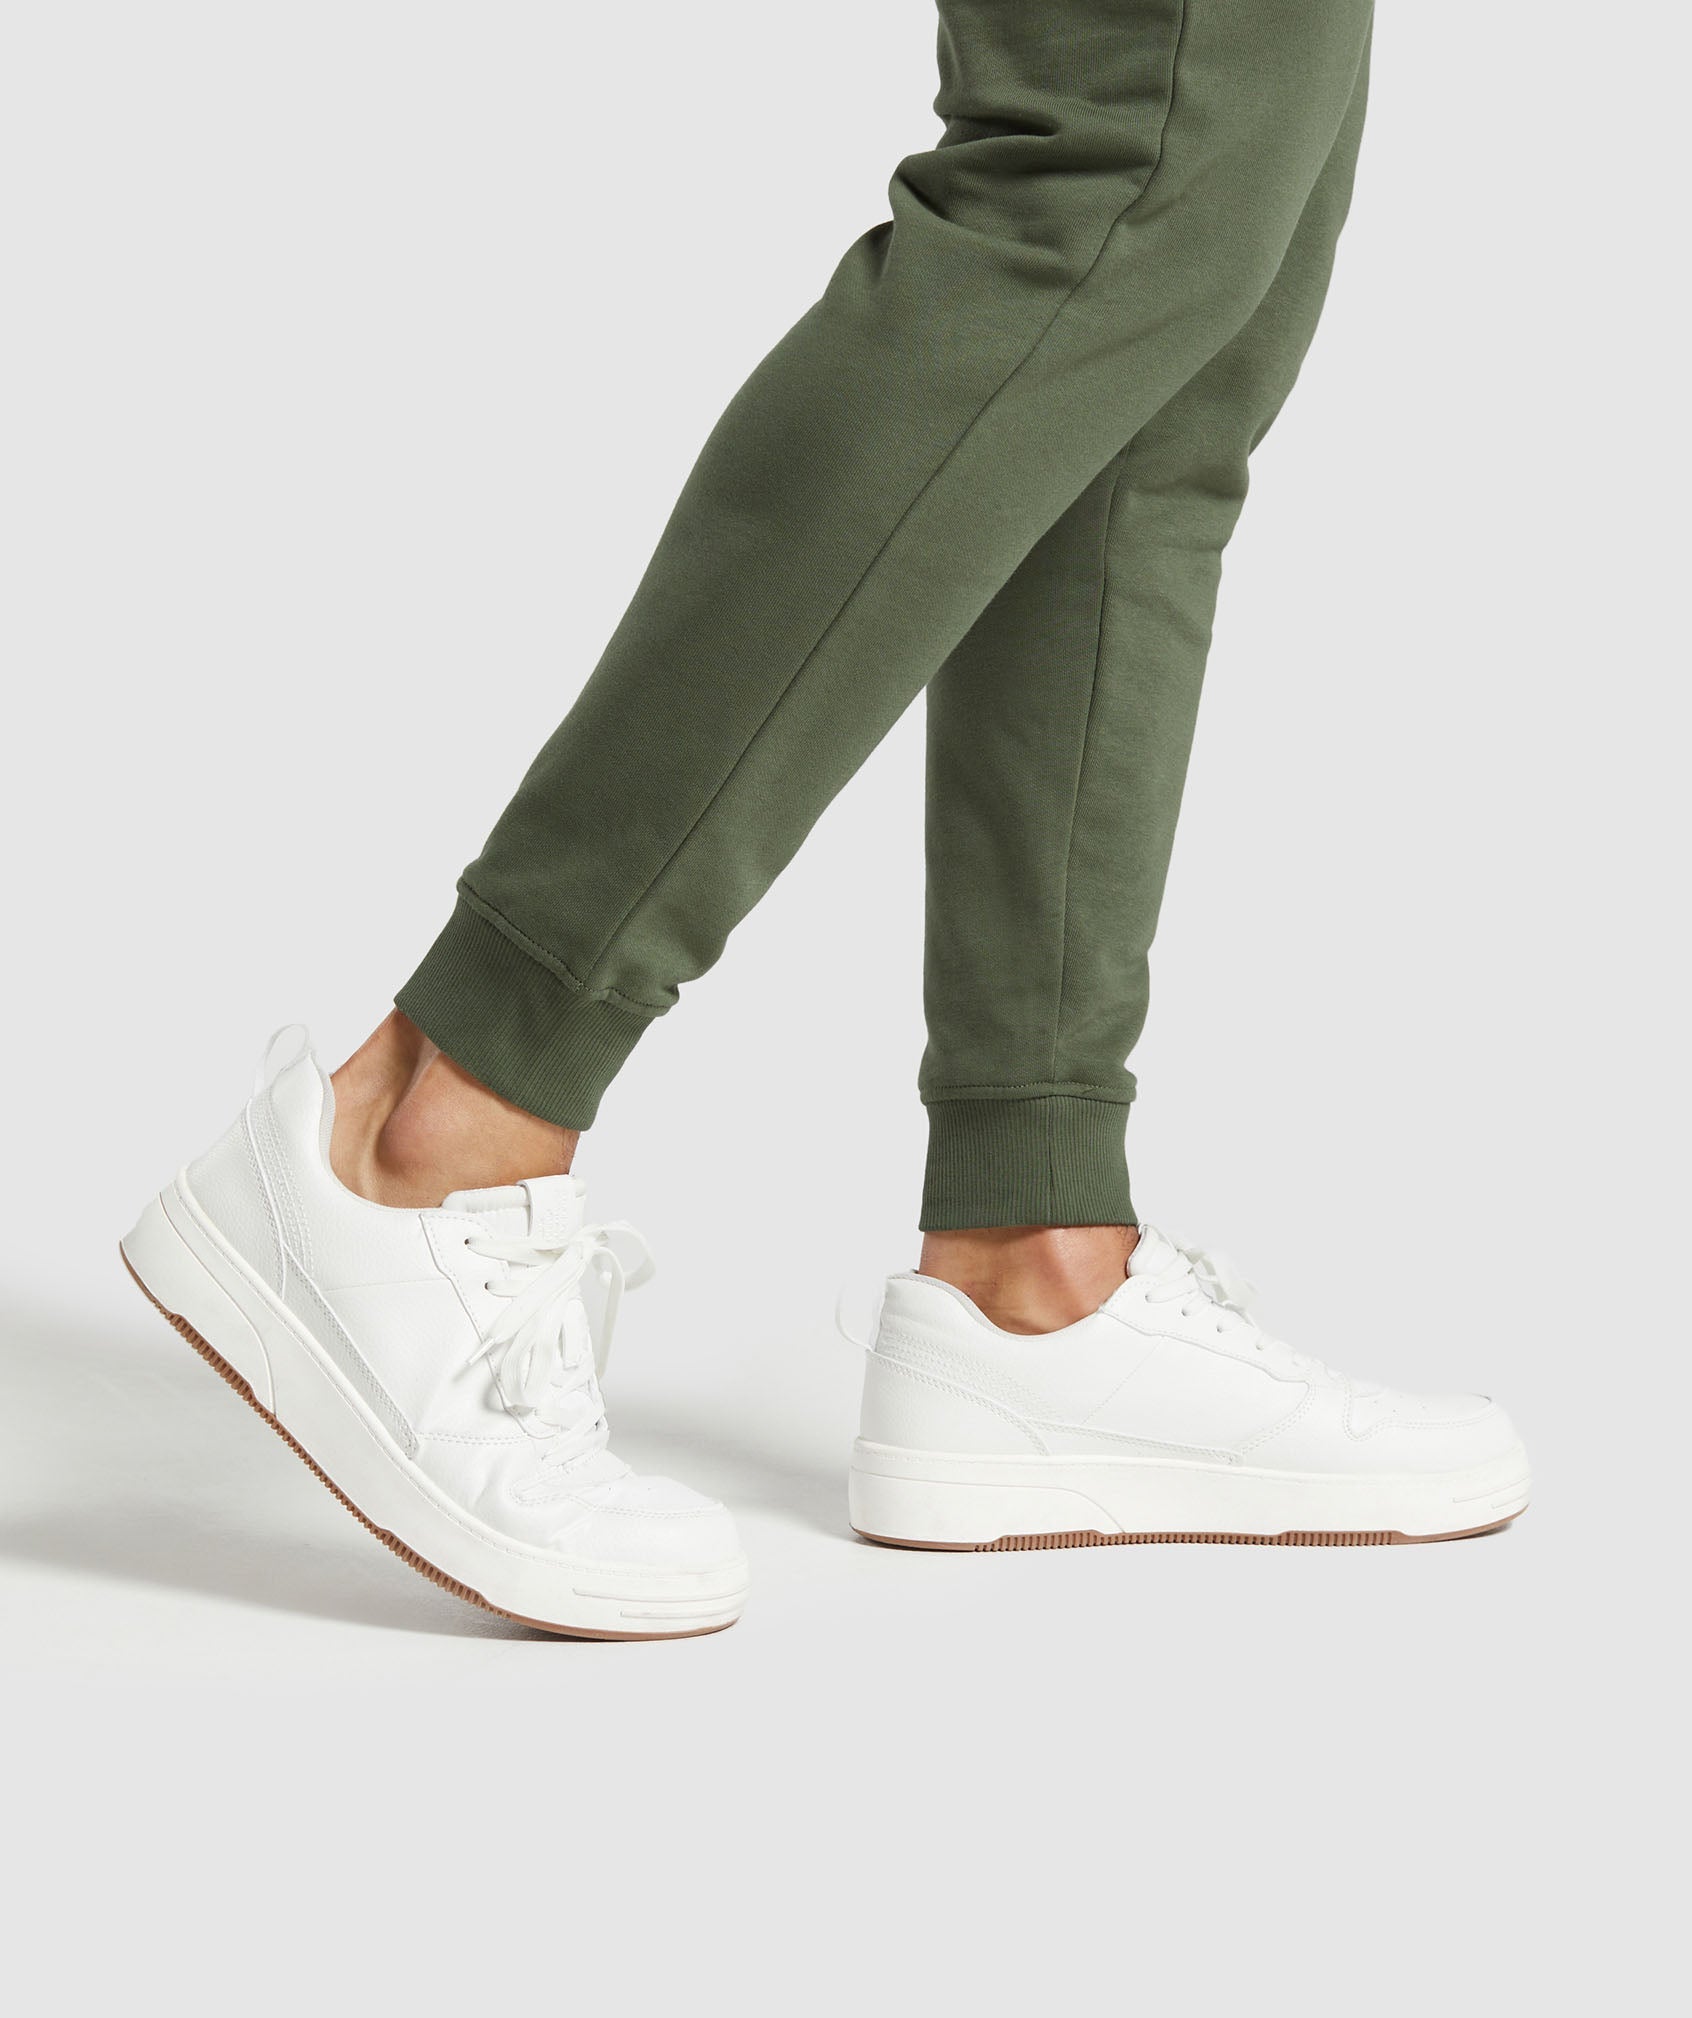 Crest Joggers in Core Olive - view 6